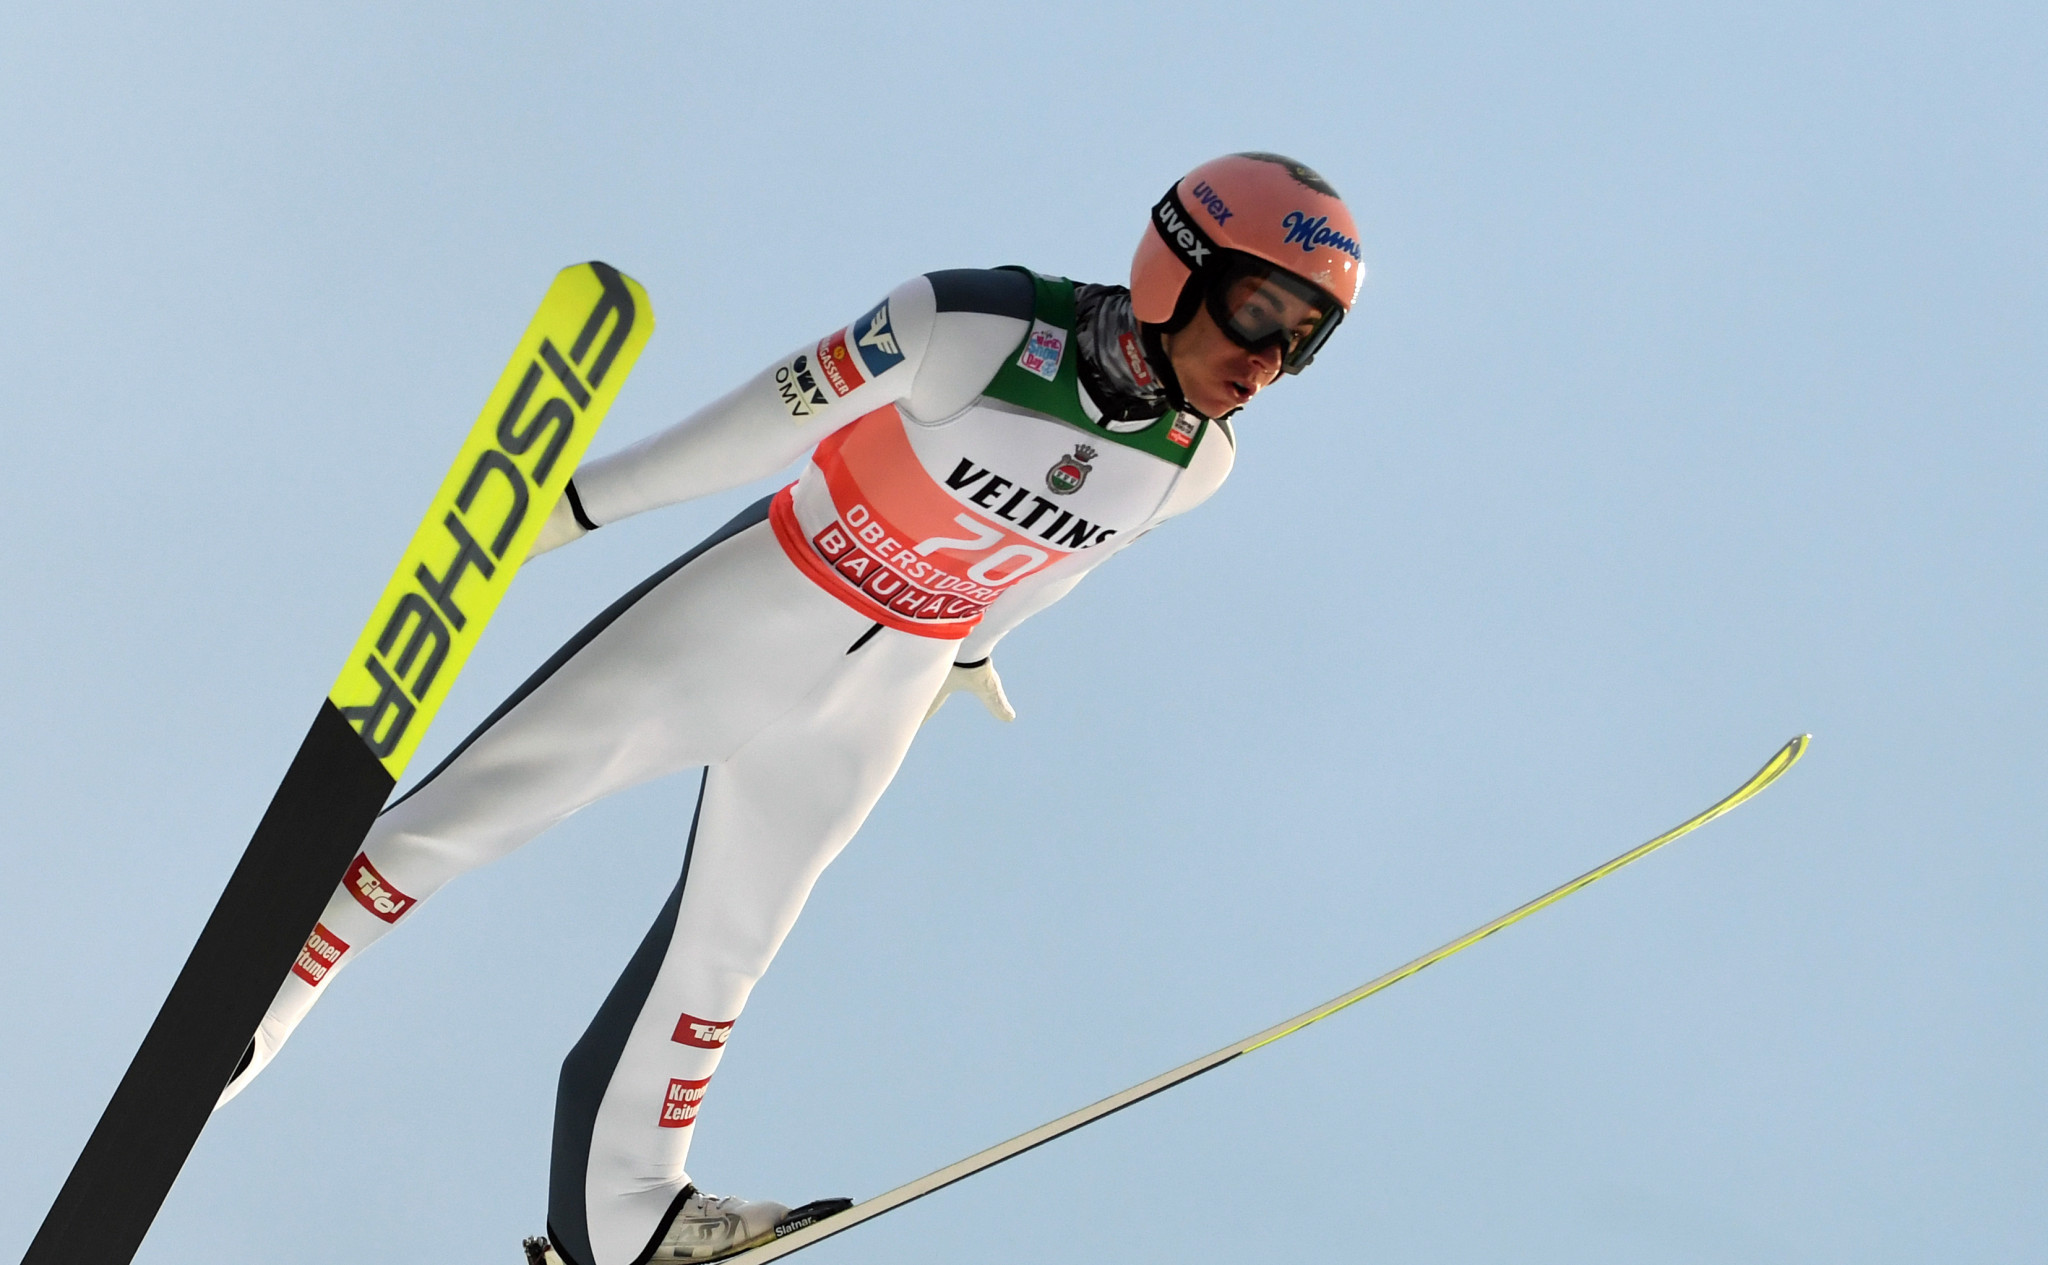 Austria's Stefan Kraft has topped qualifying for the first event in this season's Four Hills Tournament that starts in Oberstdorf tomorrow ©Getty Images